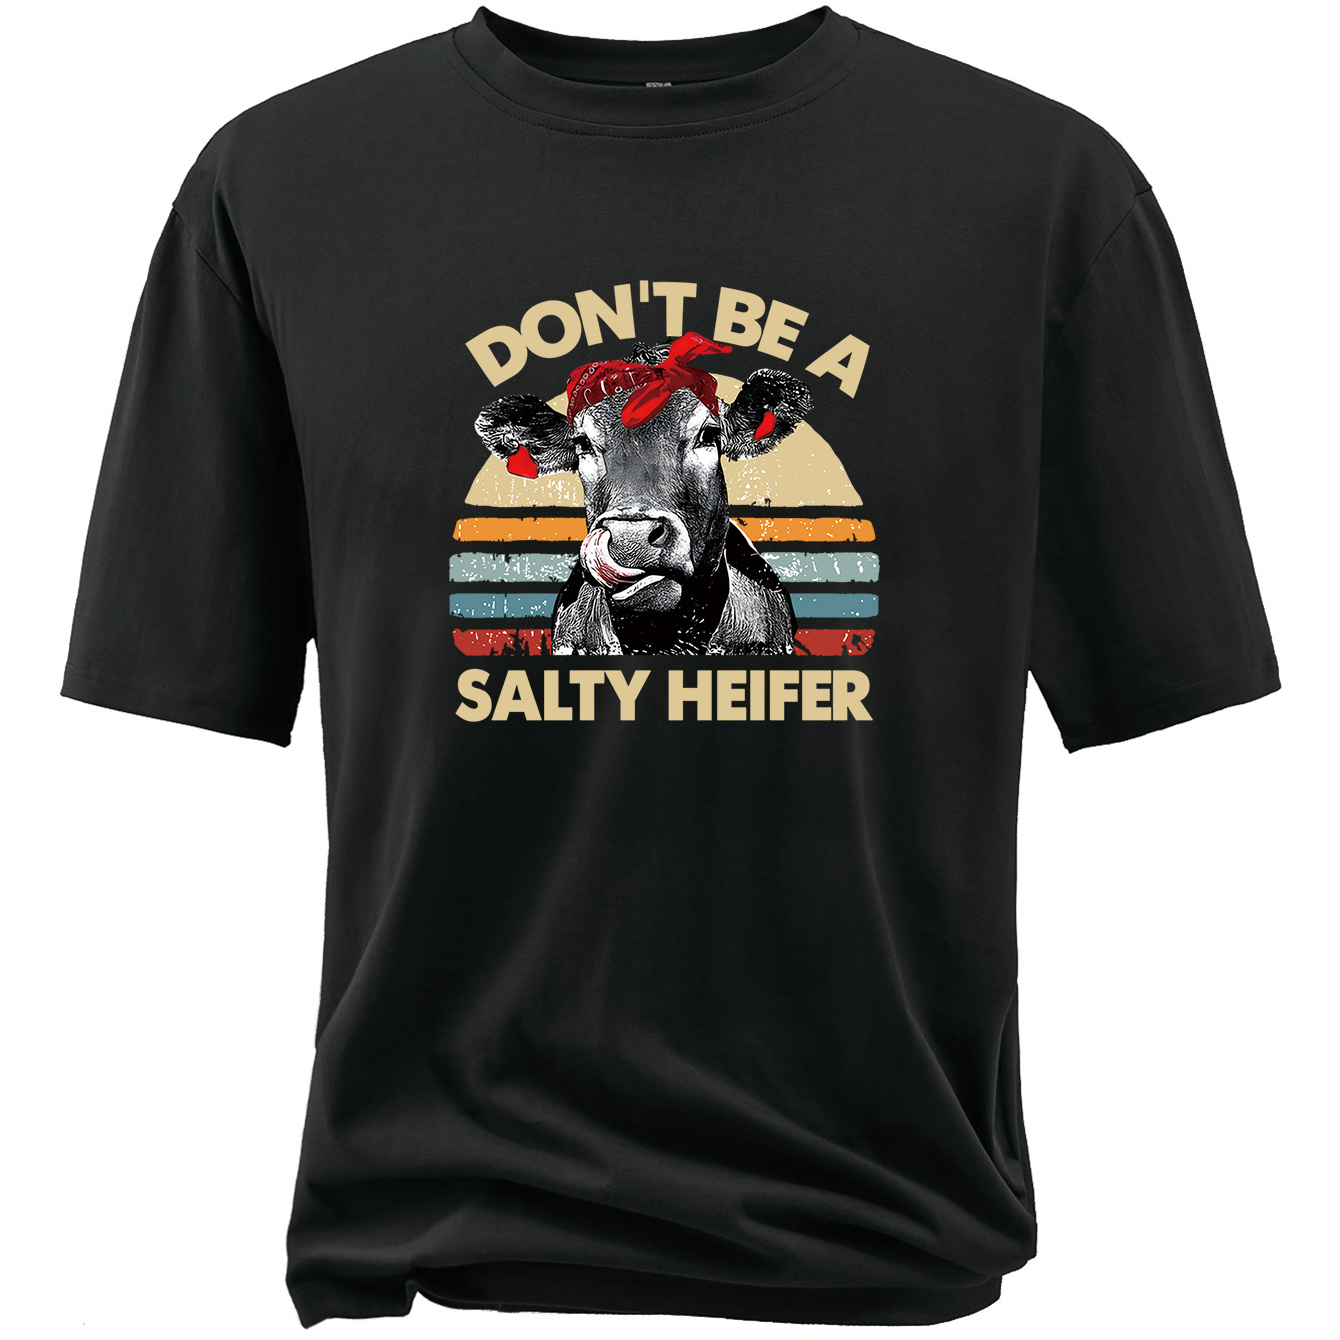 

Plus Size Men's Don't Be A Salty Heifer Print Short Sleeve T-shirts, Comfy Casual Elastic Crew Neck Tops For Men's Outdoor Activities